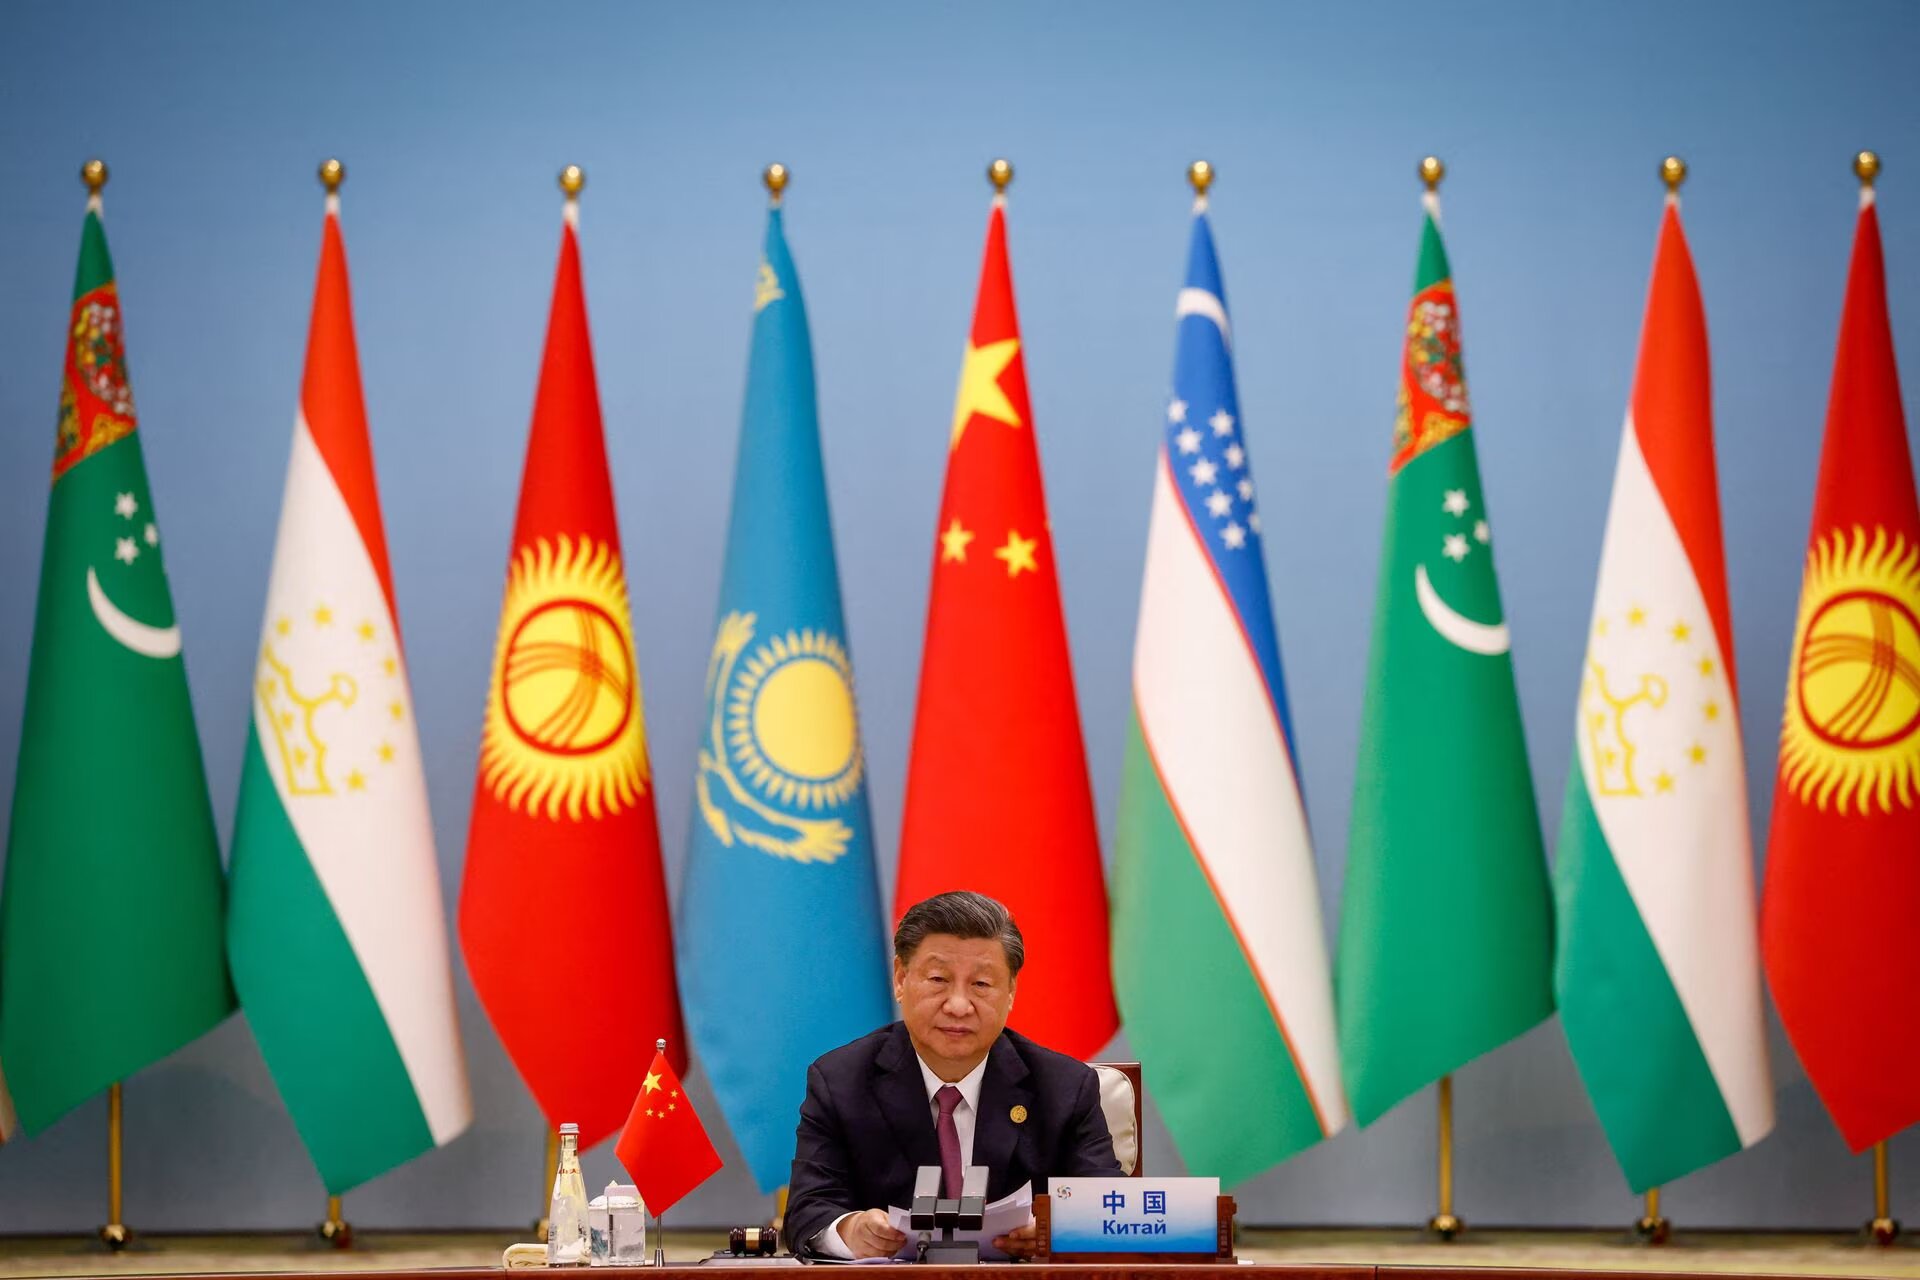 China’s Xi unveils grand development plan with Central Asia allies